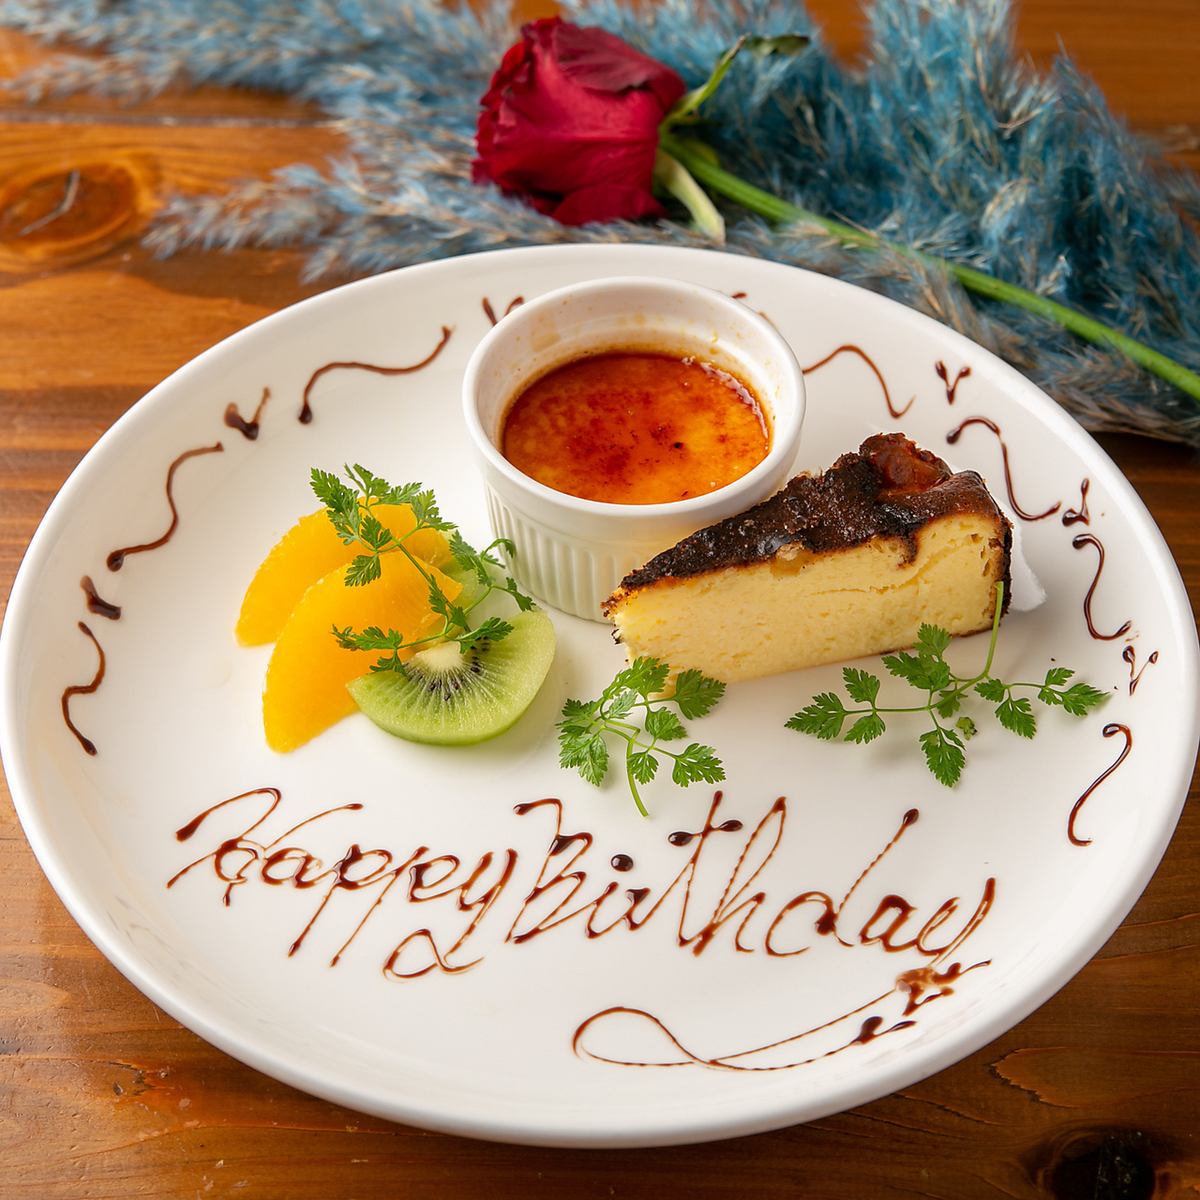 Reservations on the day are also OK! Celebrate with a plate with a message♪